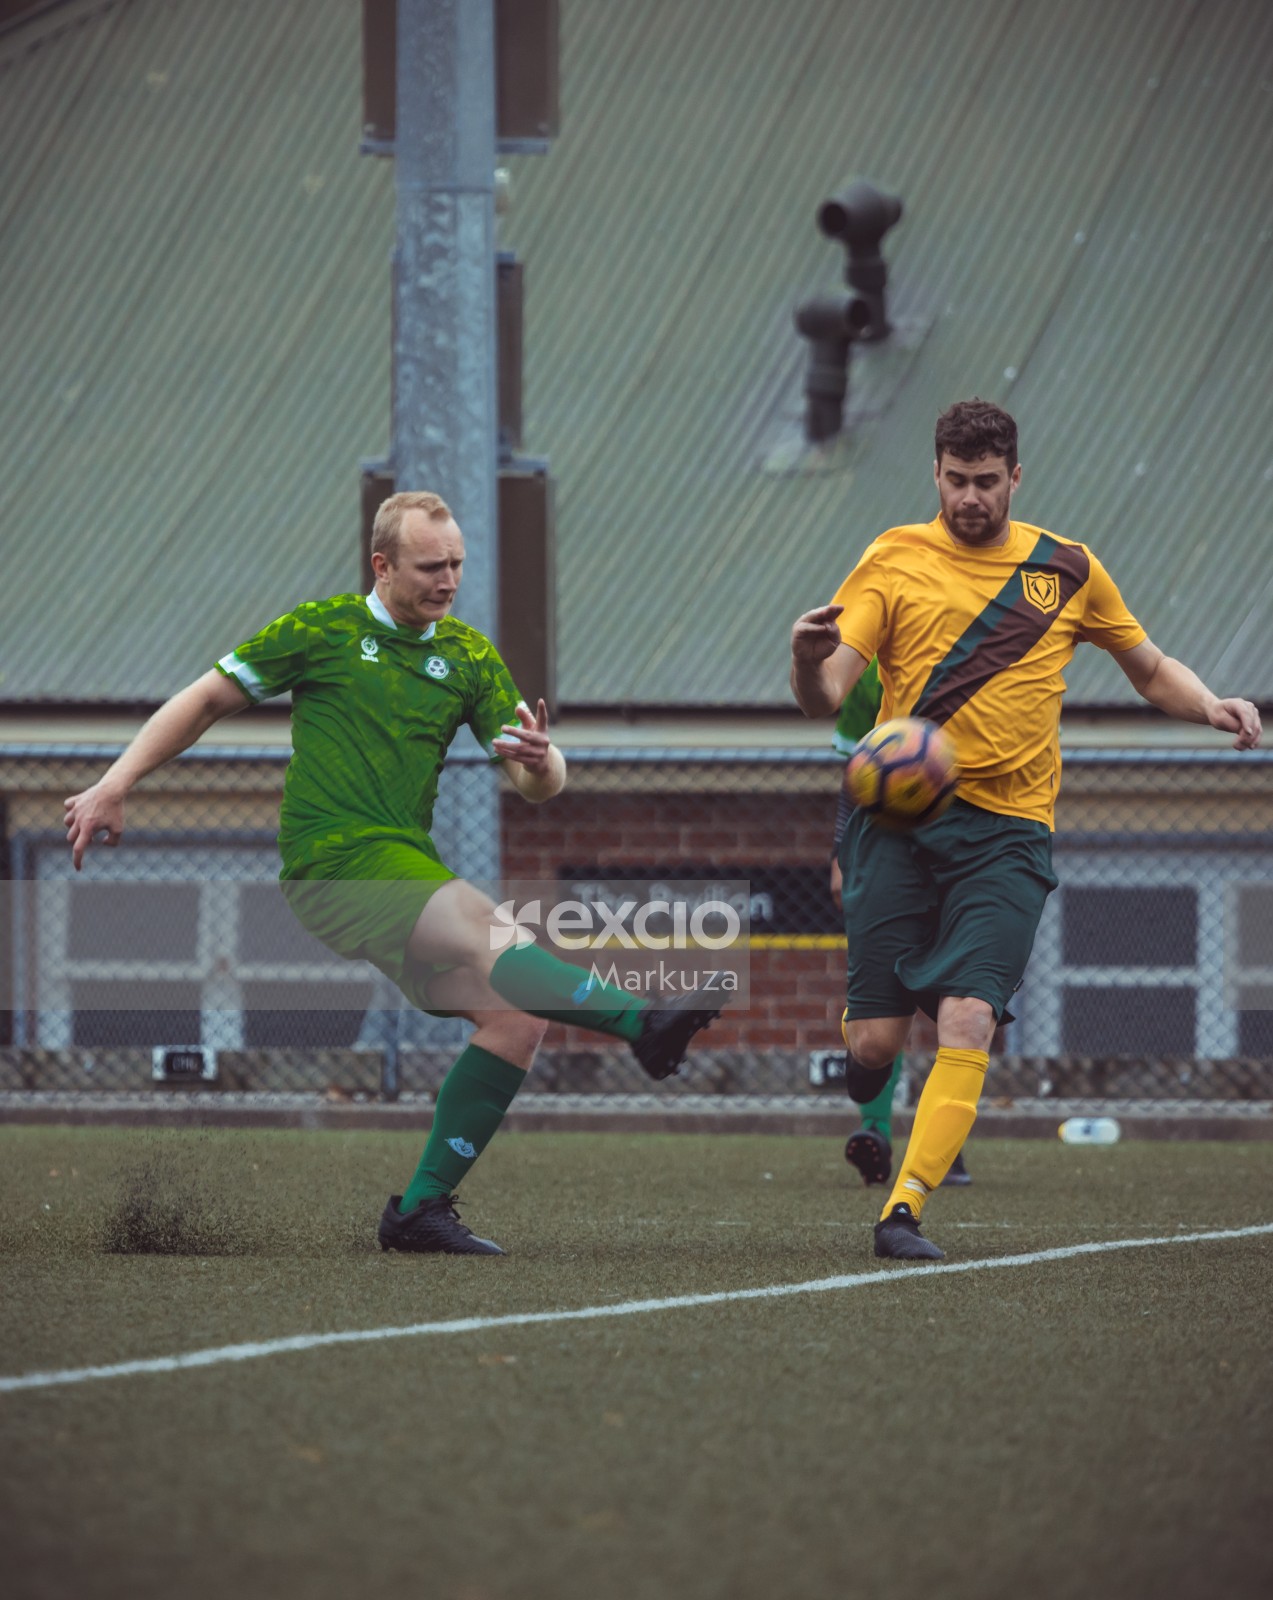 Player in green kit shooting football - Sports Zone sunday league